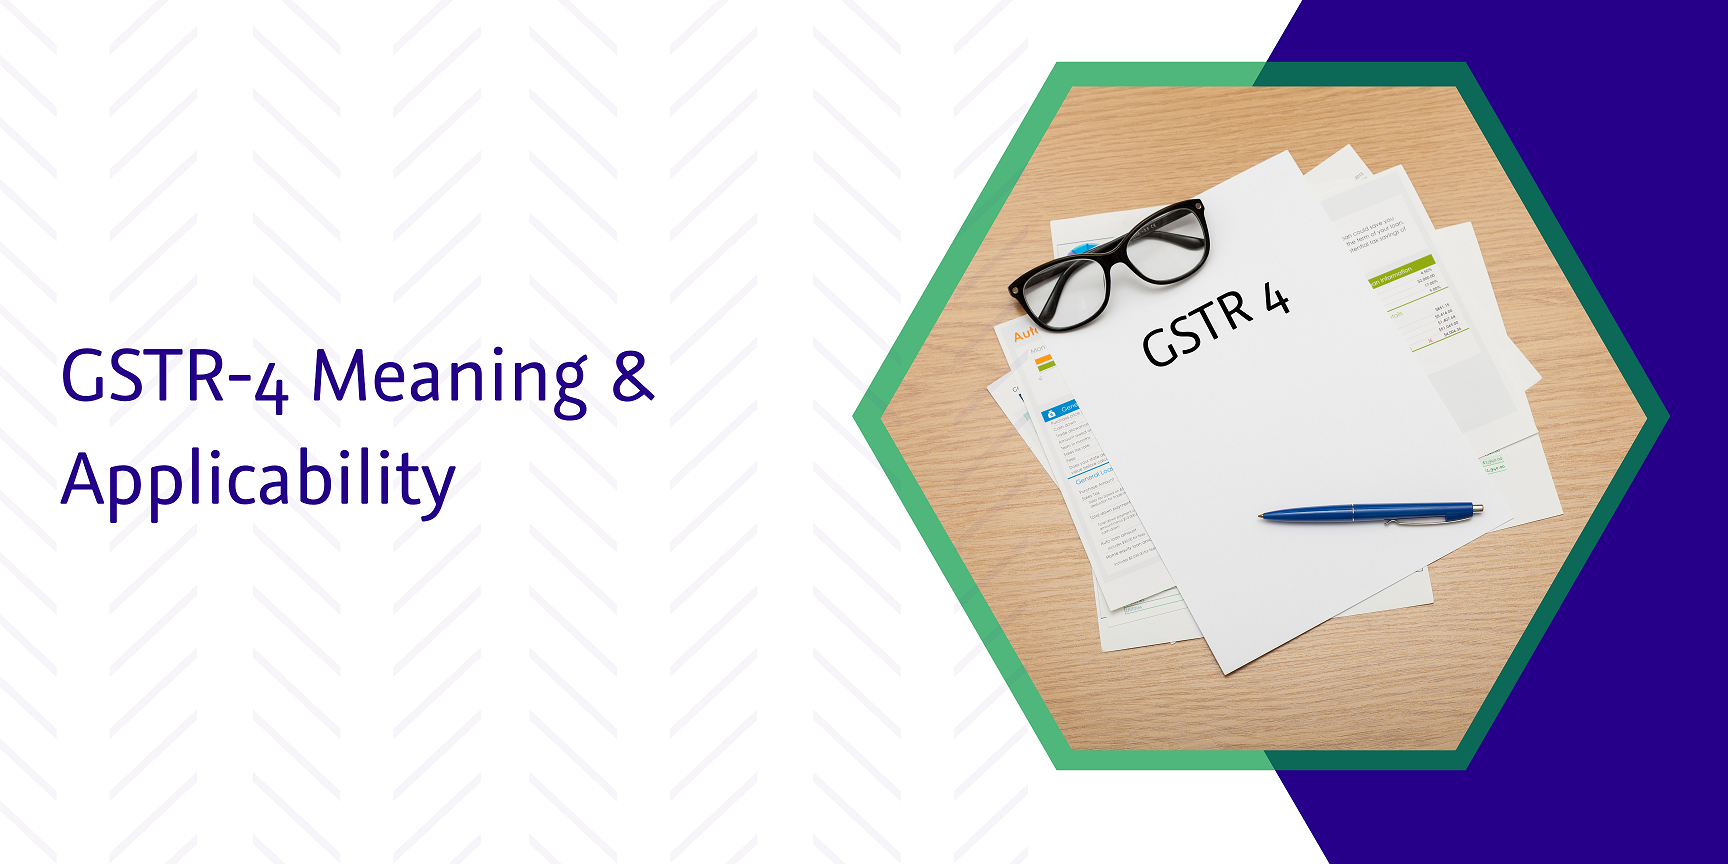 gstr-4 meaning & applicability